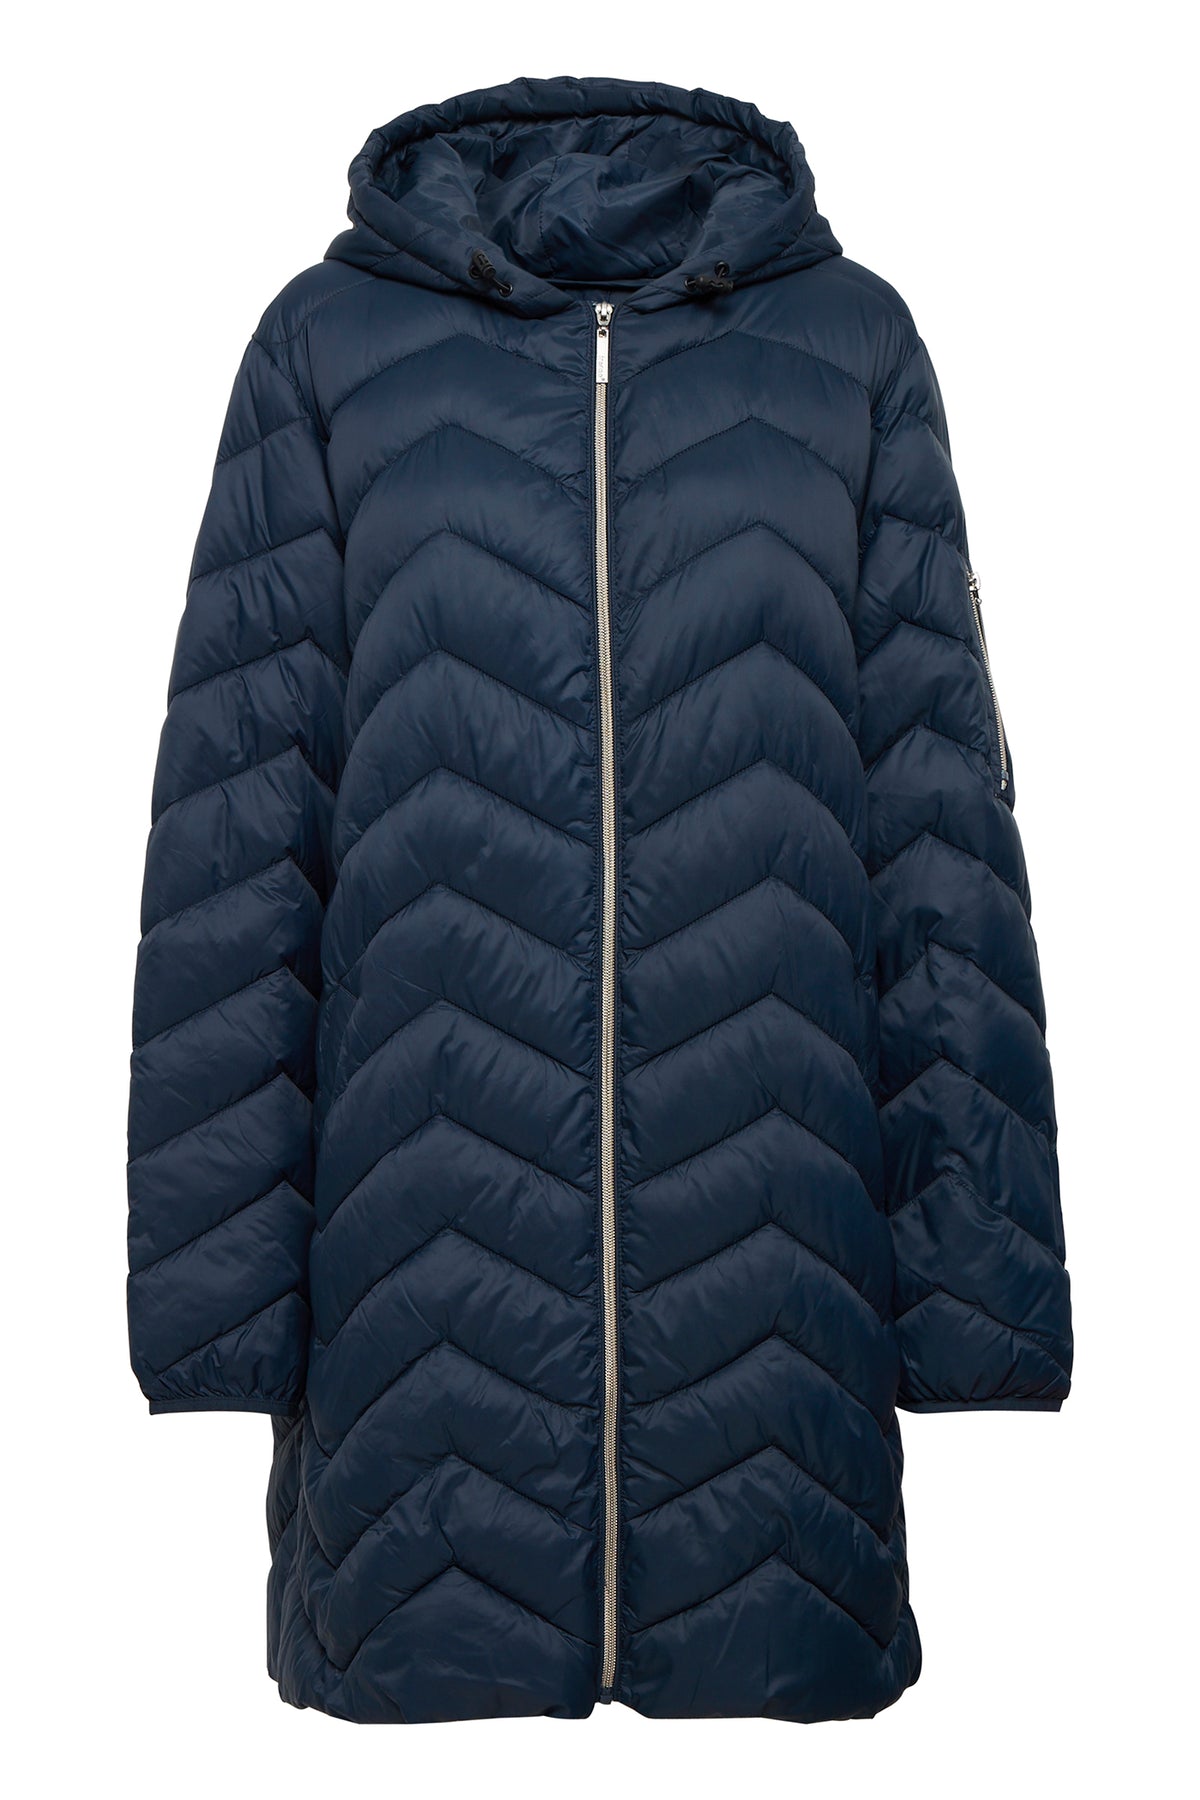 The Ines Curve Puffer Jacket in Navy